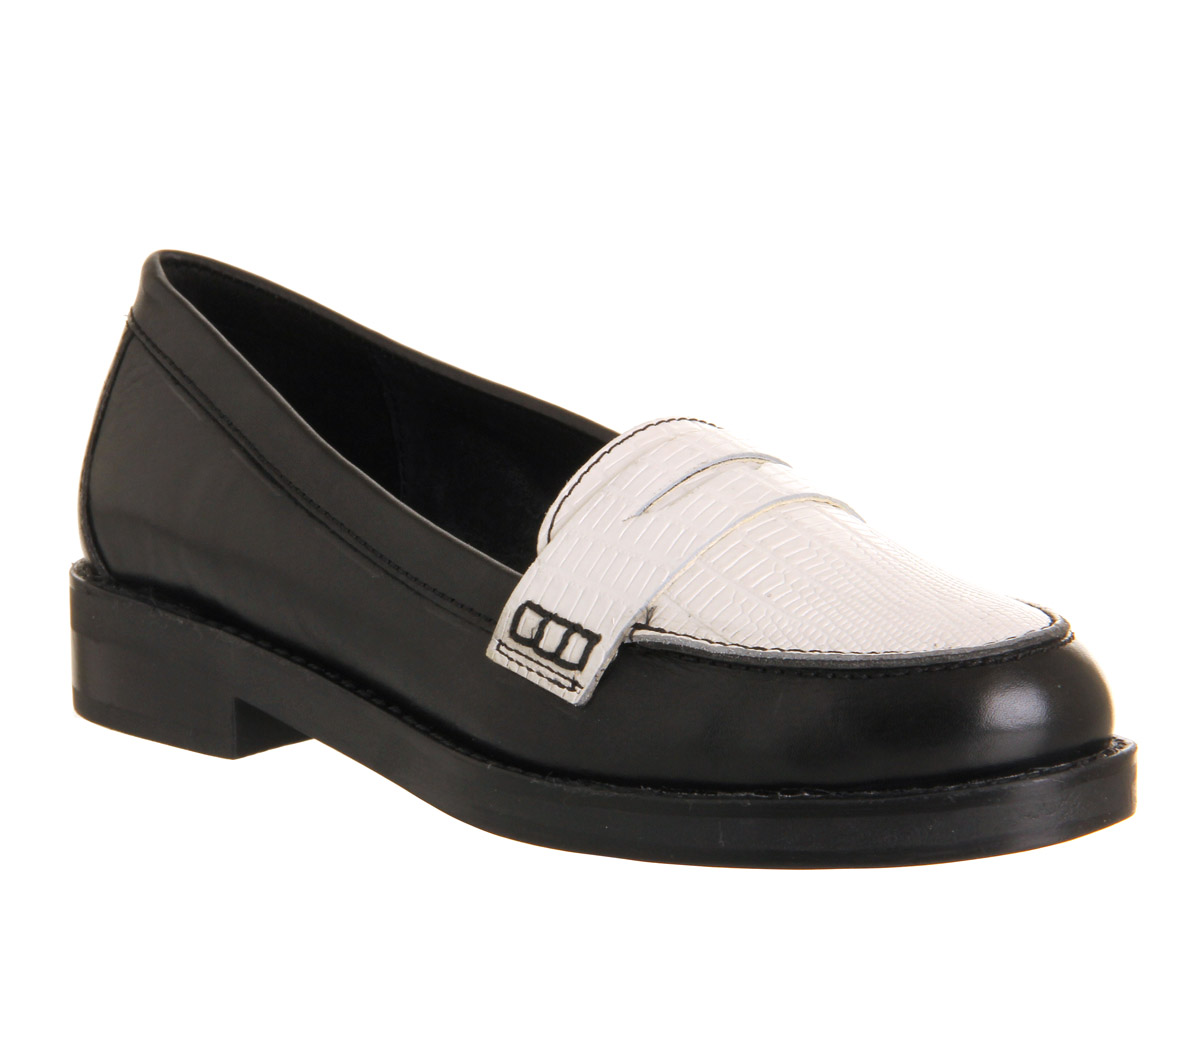 OFFICEVictorious Penny loafersBlack White Lizard Leather